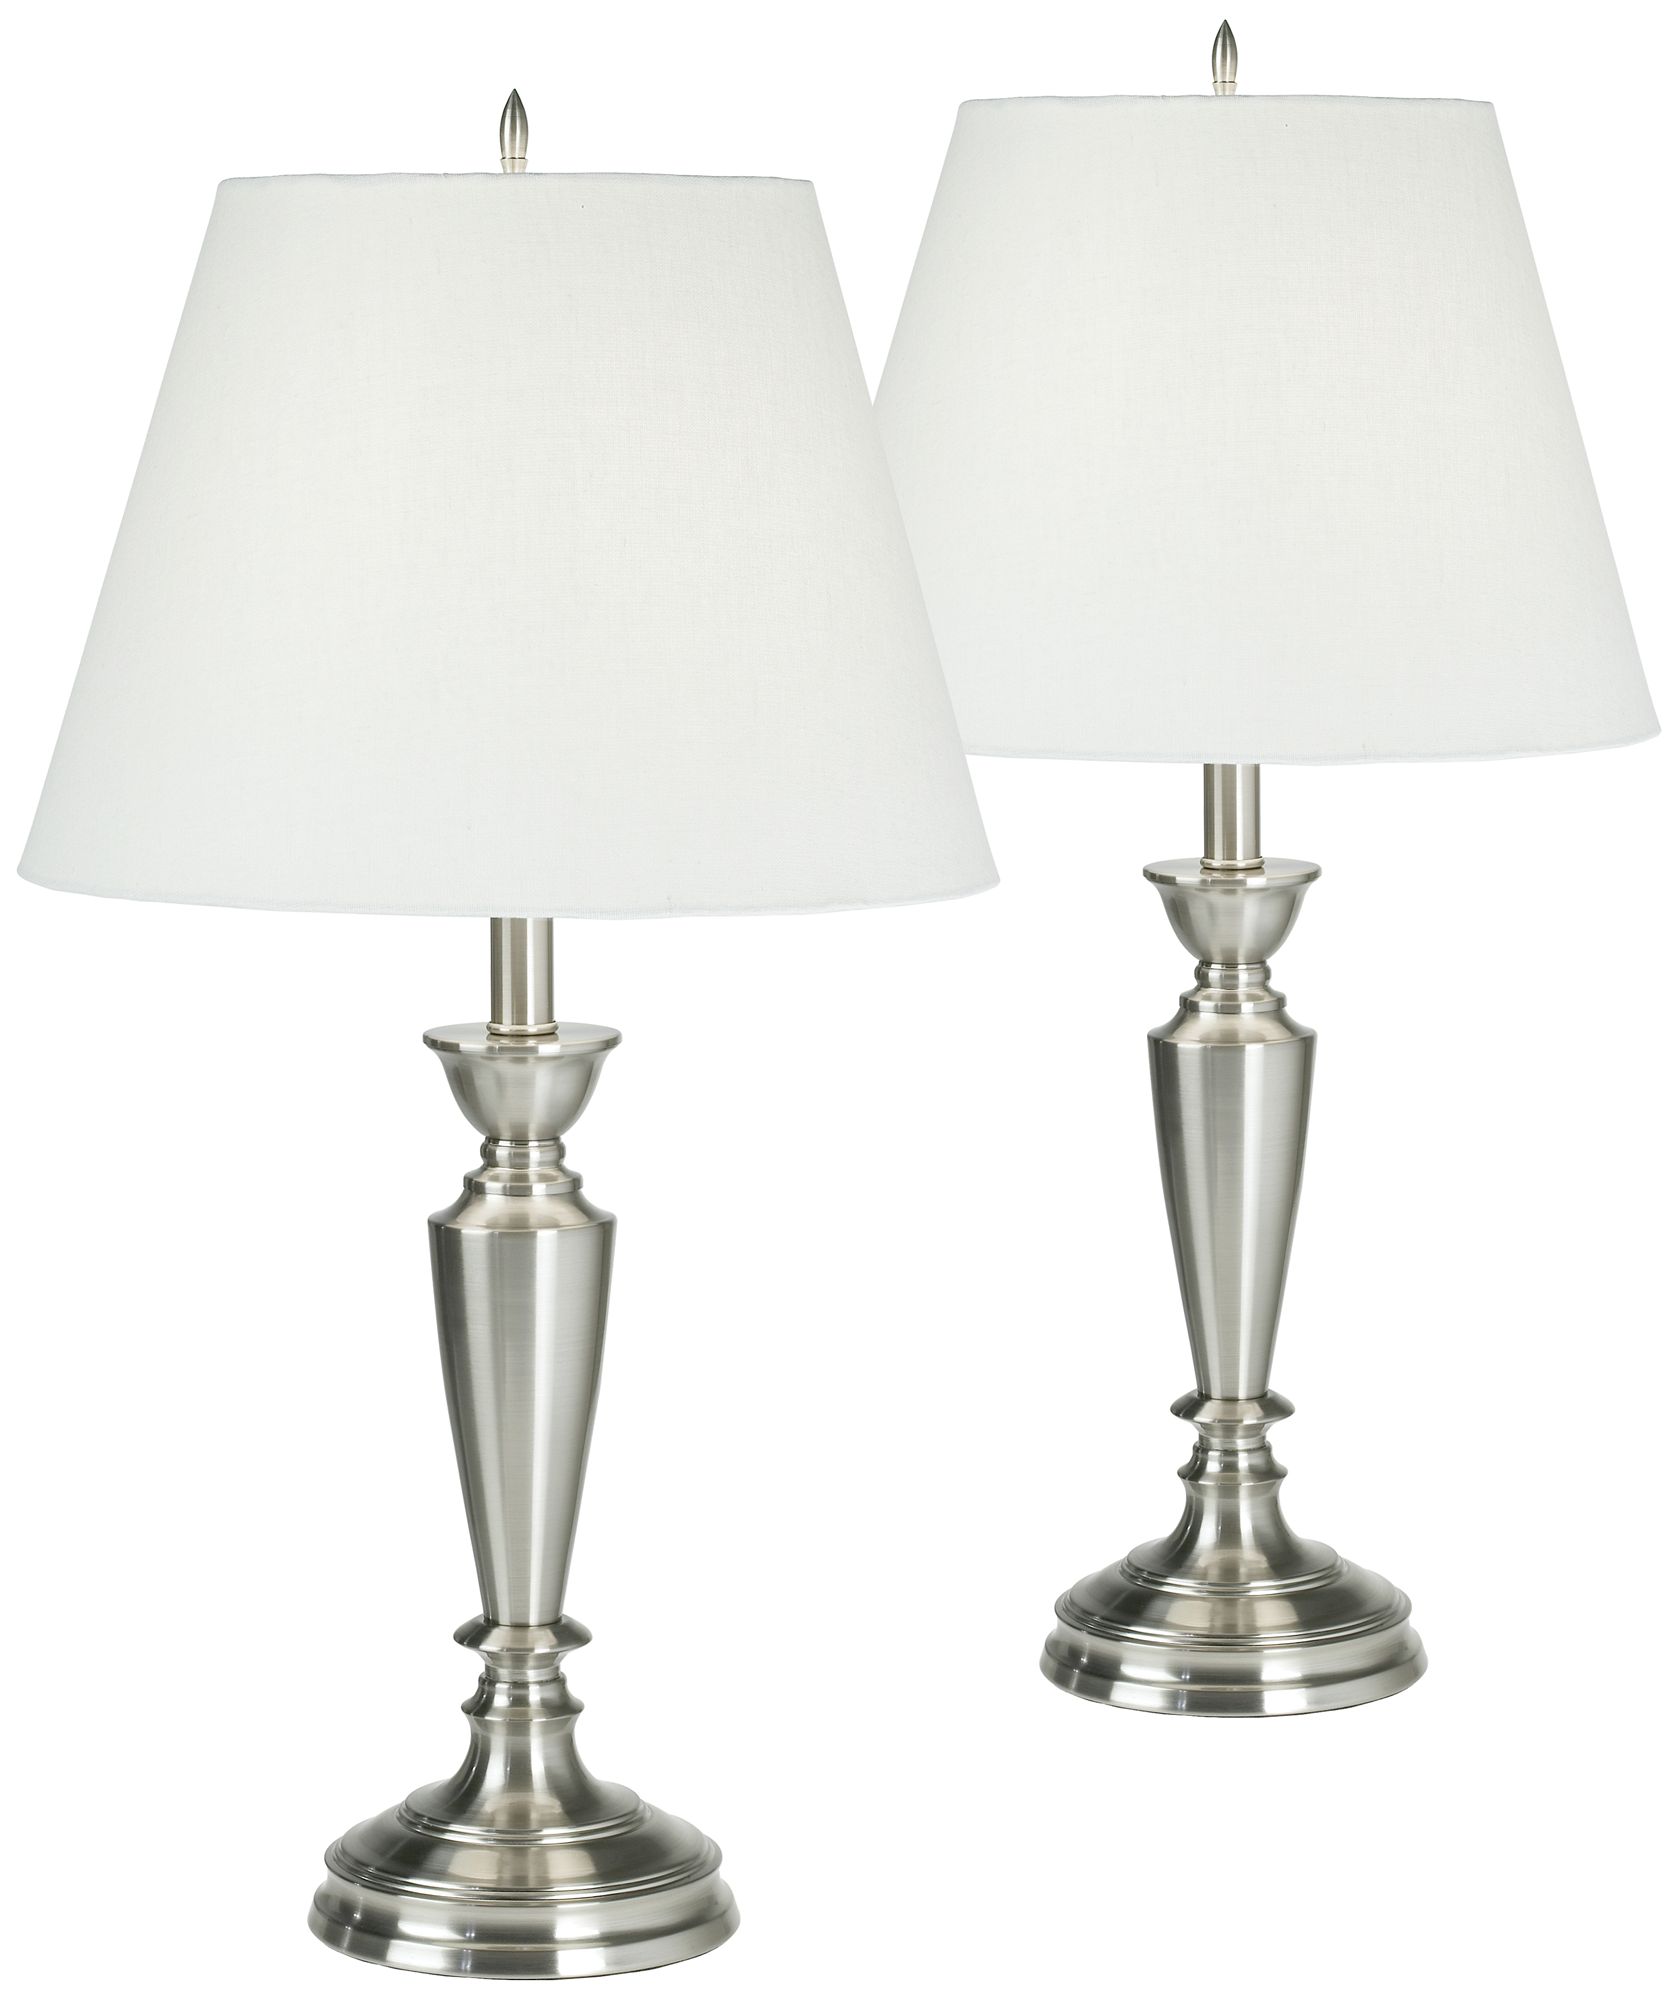 Brushed Nickel Table Lamps Set of 2 